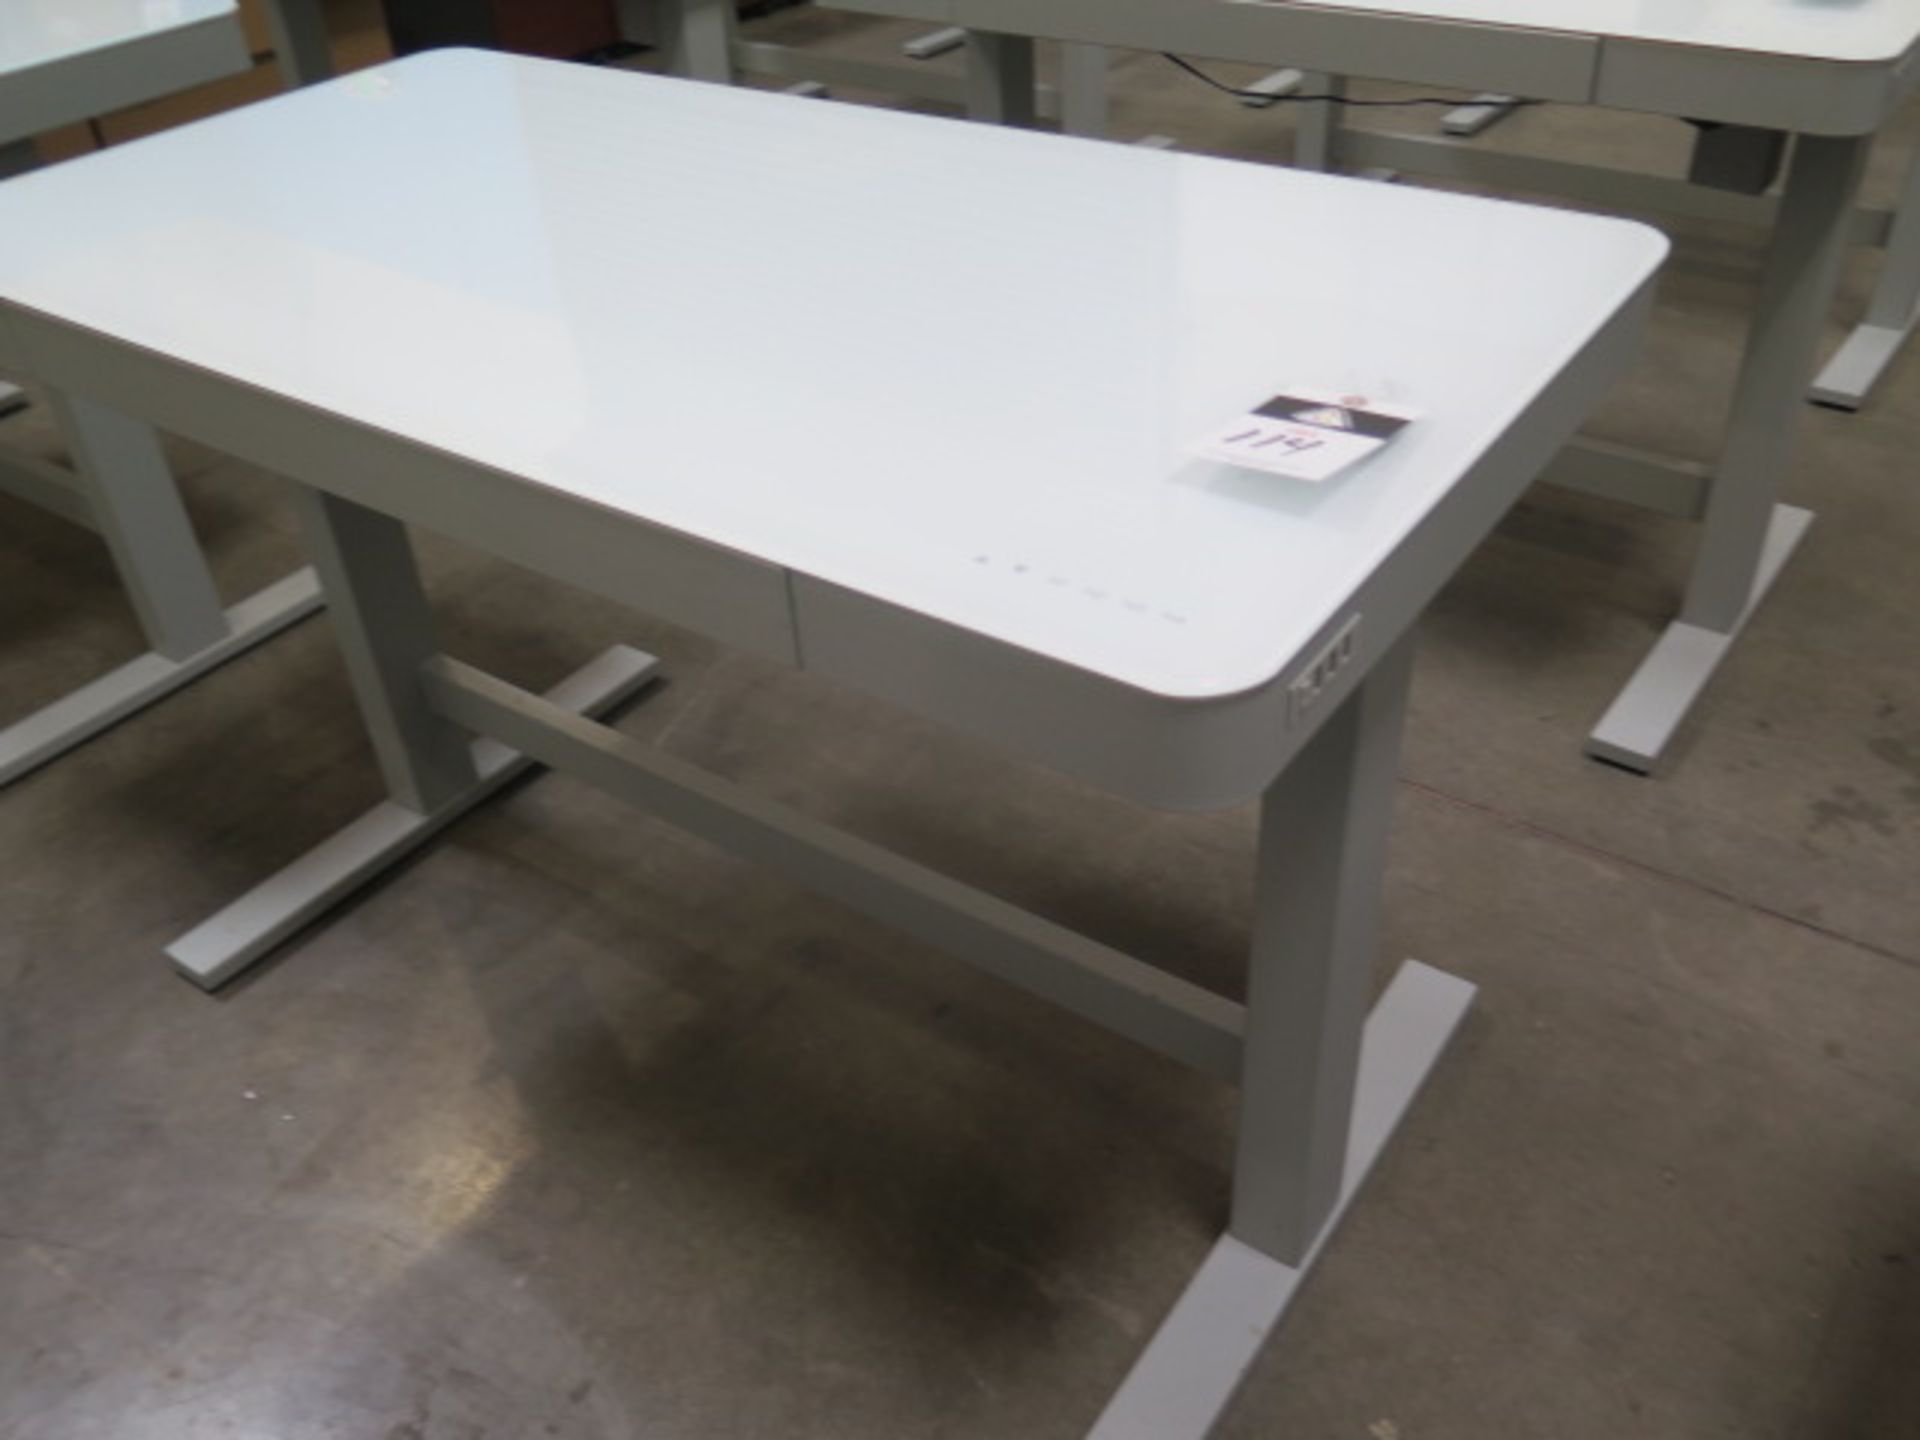 2018 Twin Star International Style MS Motorized Elevating Desks w/ Tempered Glass Top, SOLD AS IS - Image 2 of 6